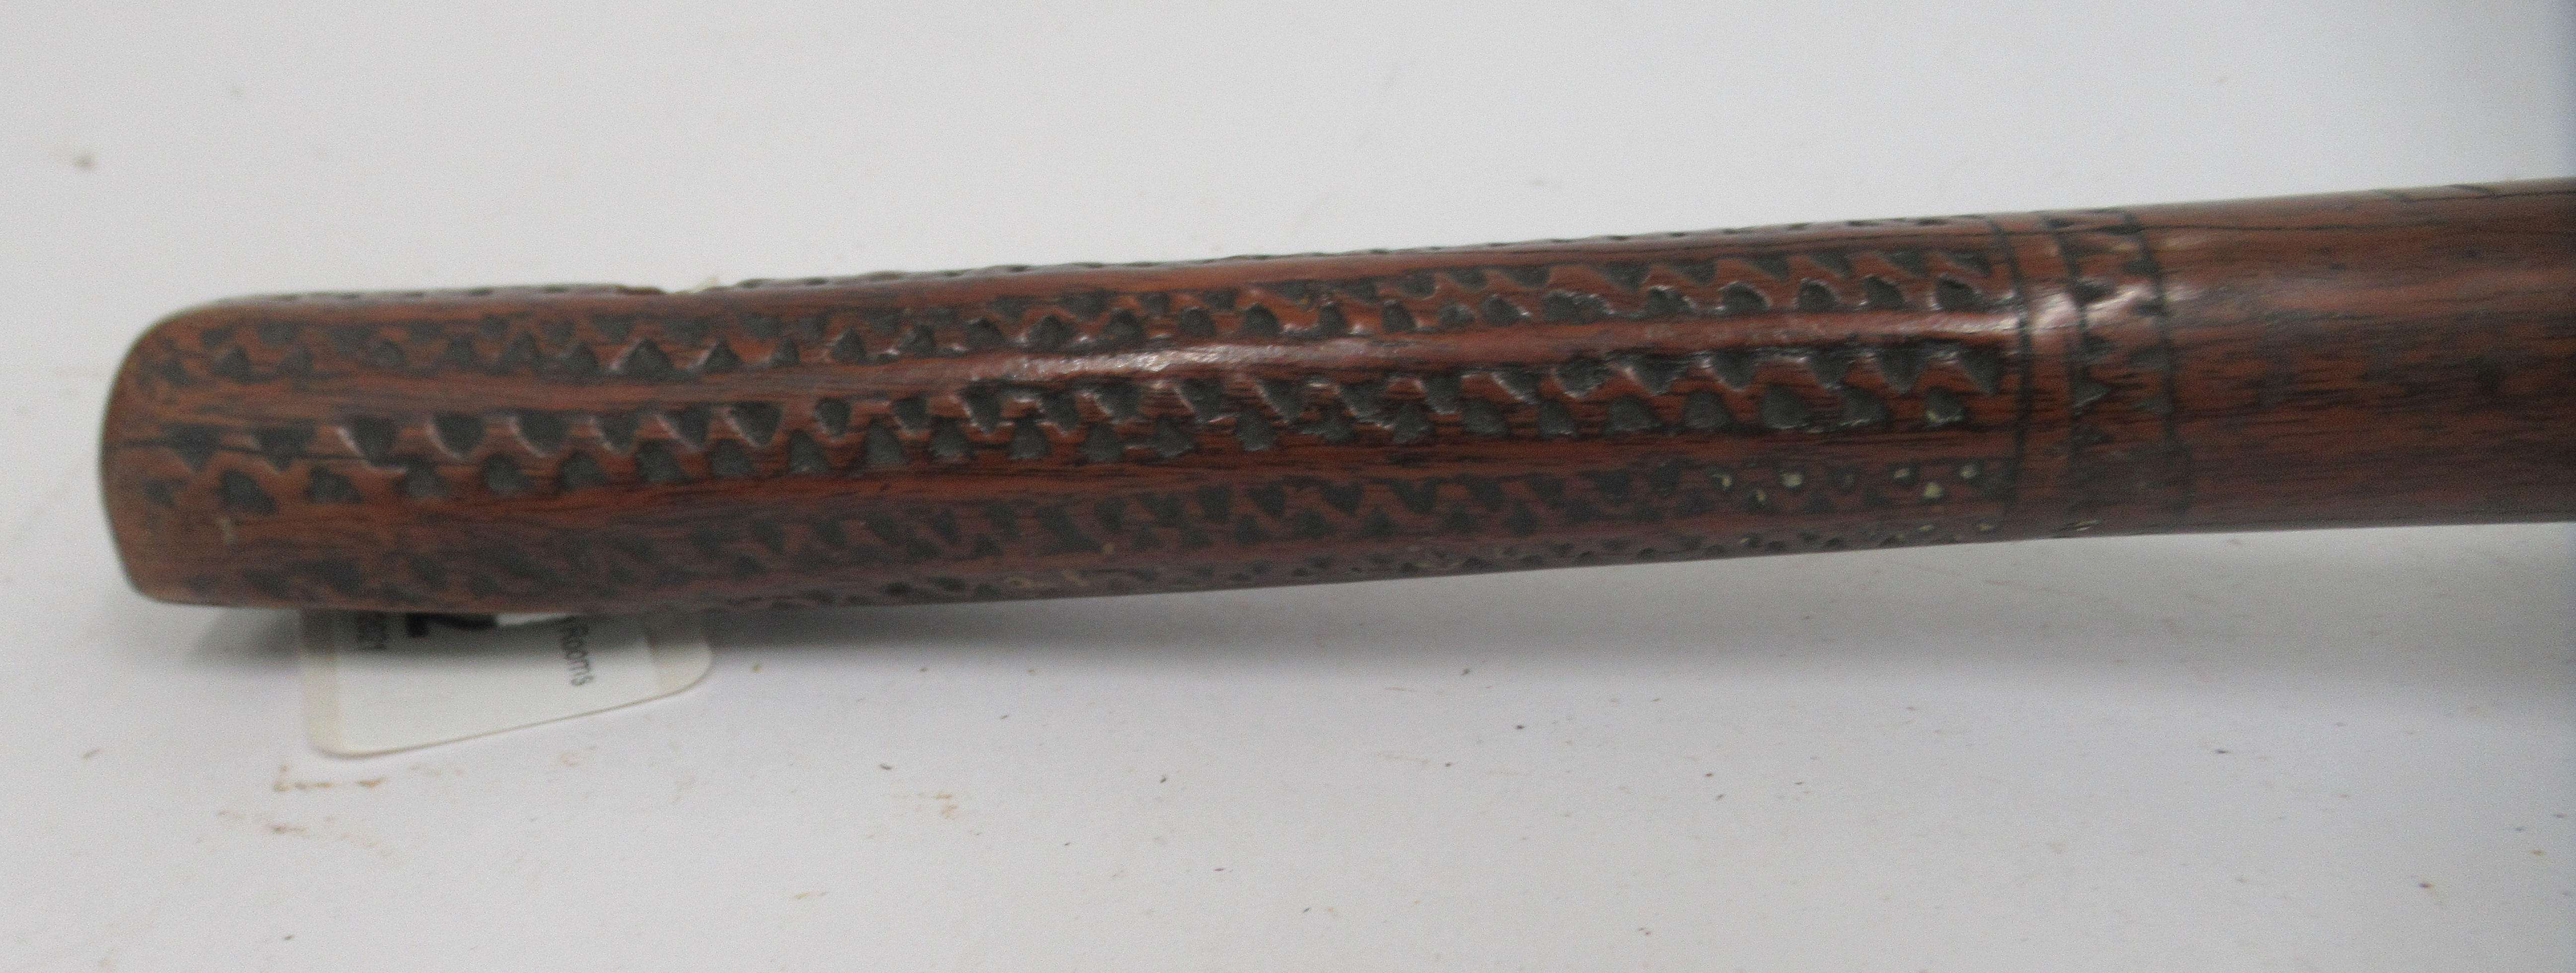 A late 19thC Fijian hardwood Iula Tavatava throwing club, the handle carved with geometric patterns - Image 5 of 10